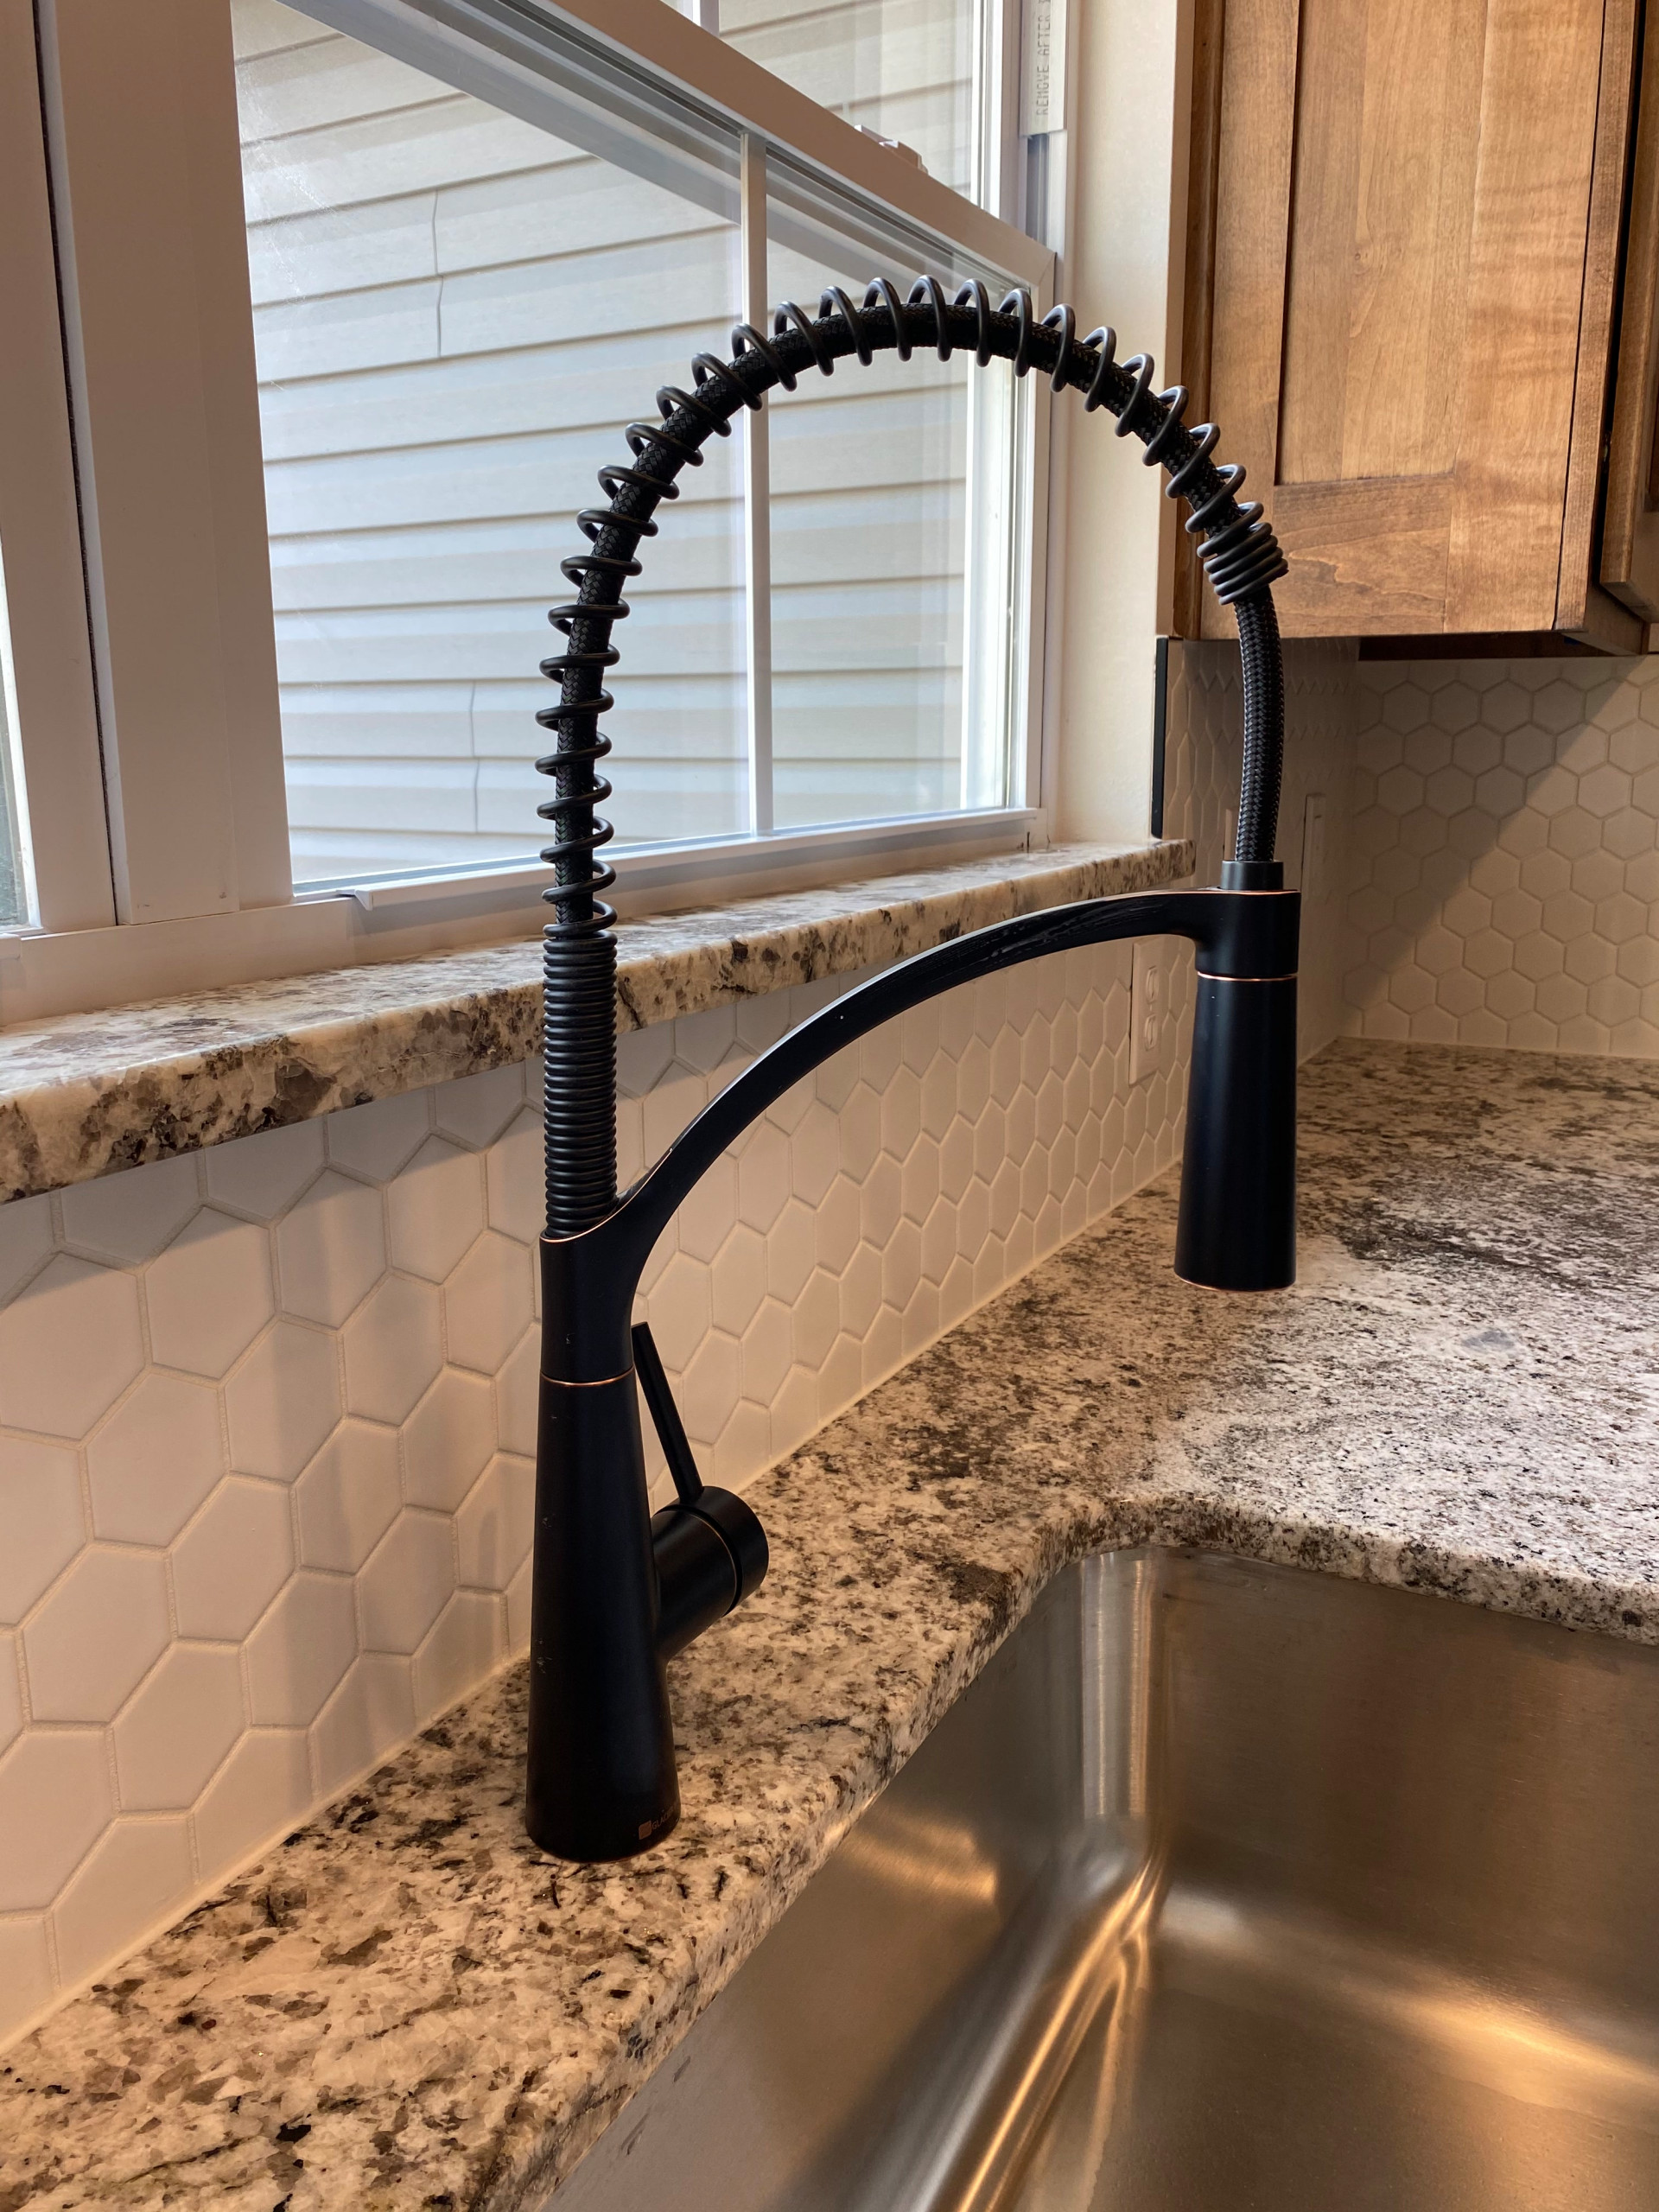 Oil rubbed bronze pull down faucet